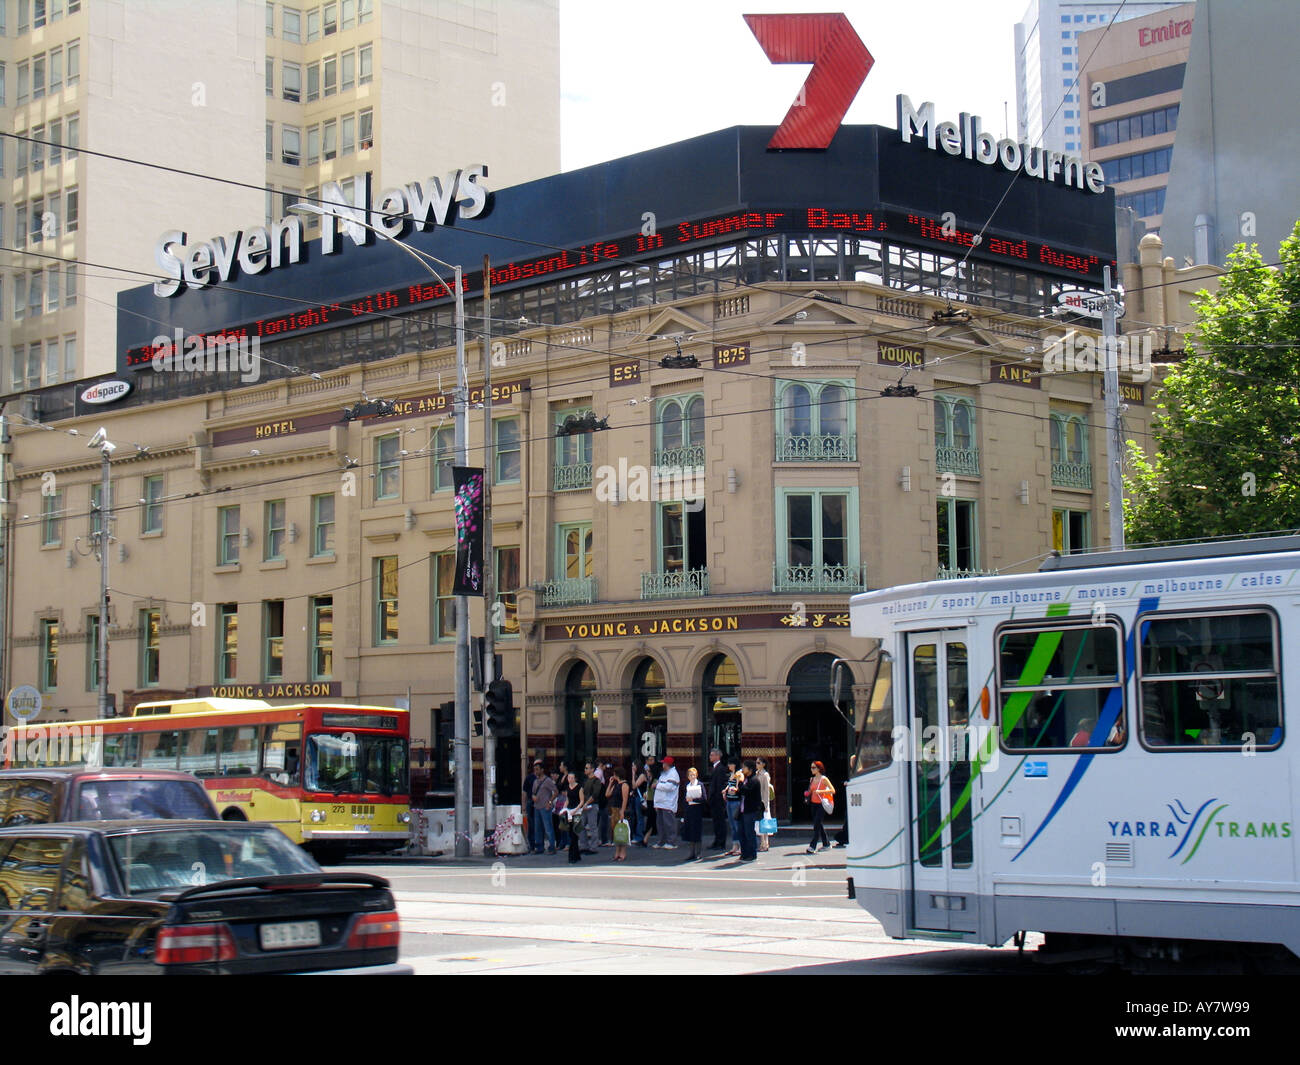 Landmark hotel and public house Young & Jackson at Swanston and Flinders streets Melbourne Victoria Australia Stock Photo